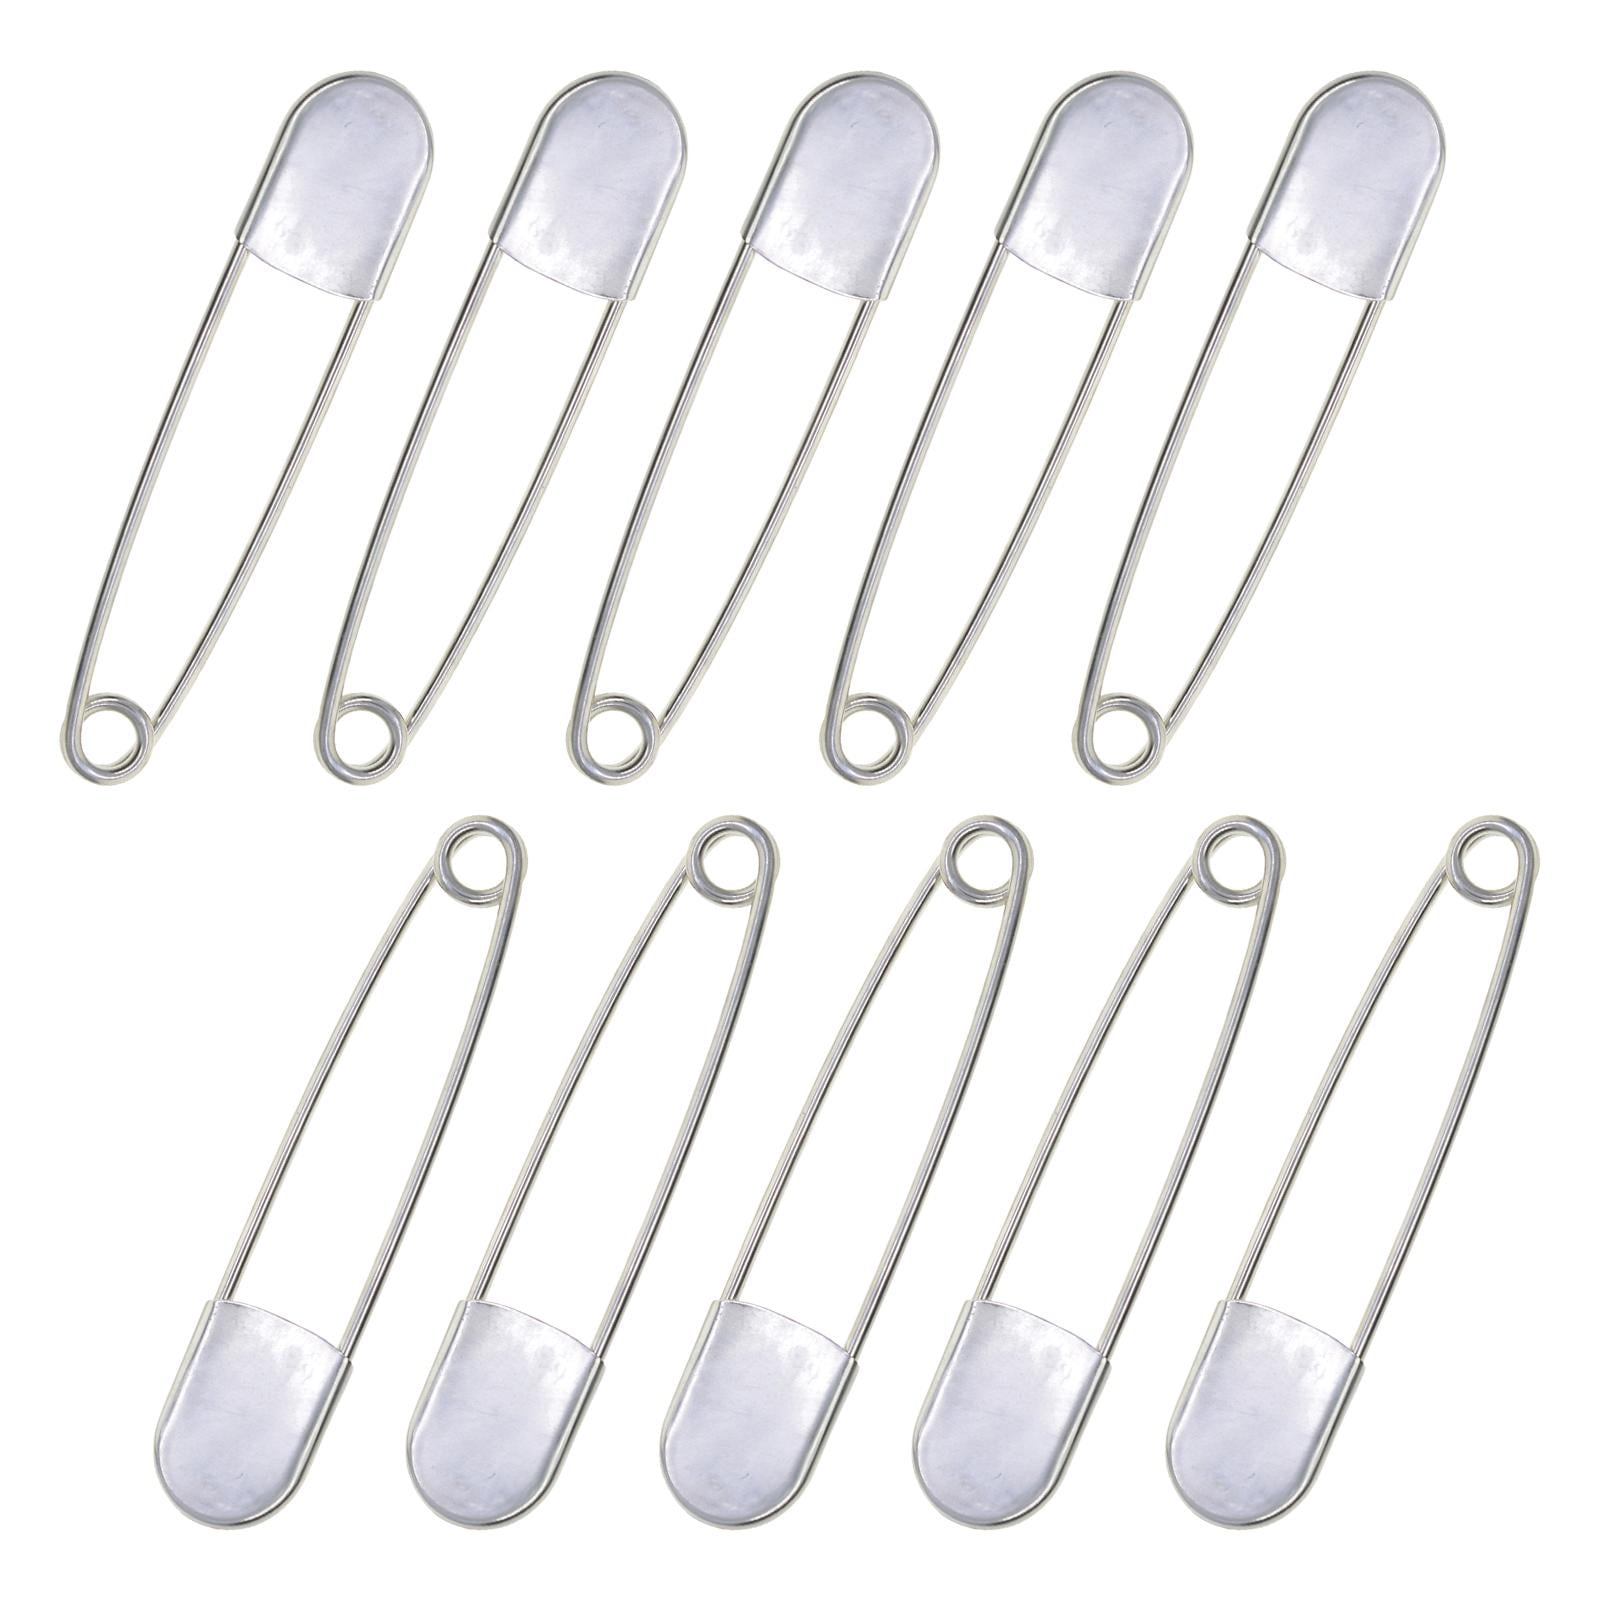 HAMIYELL Large Safety Pins 5 inch Jumbo Safety Pins Heavy Duty Stainless Steel Oversize Safety Pins Extra Large Pins for Blankets Heavy Laundry Uphols